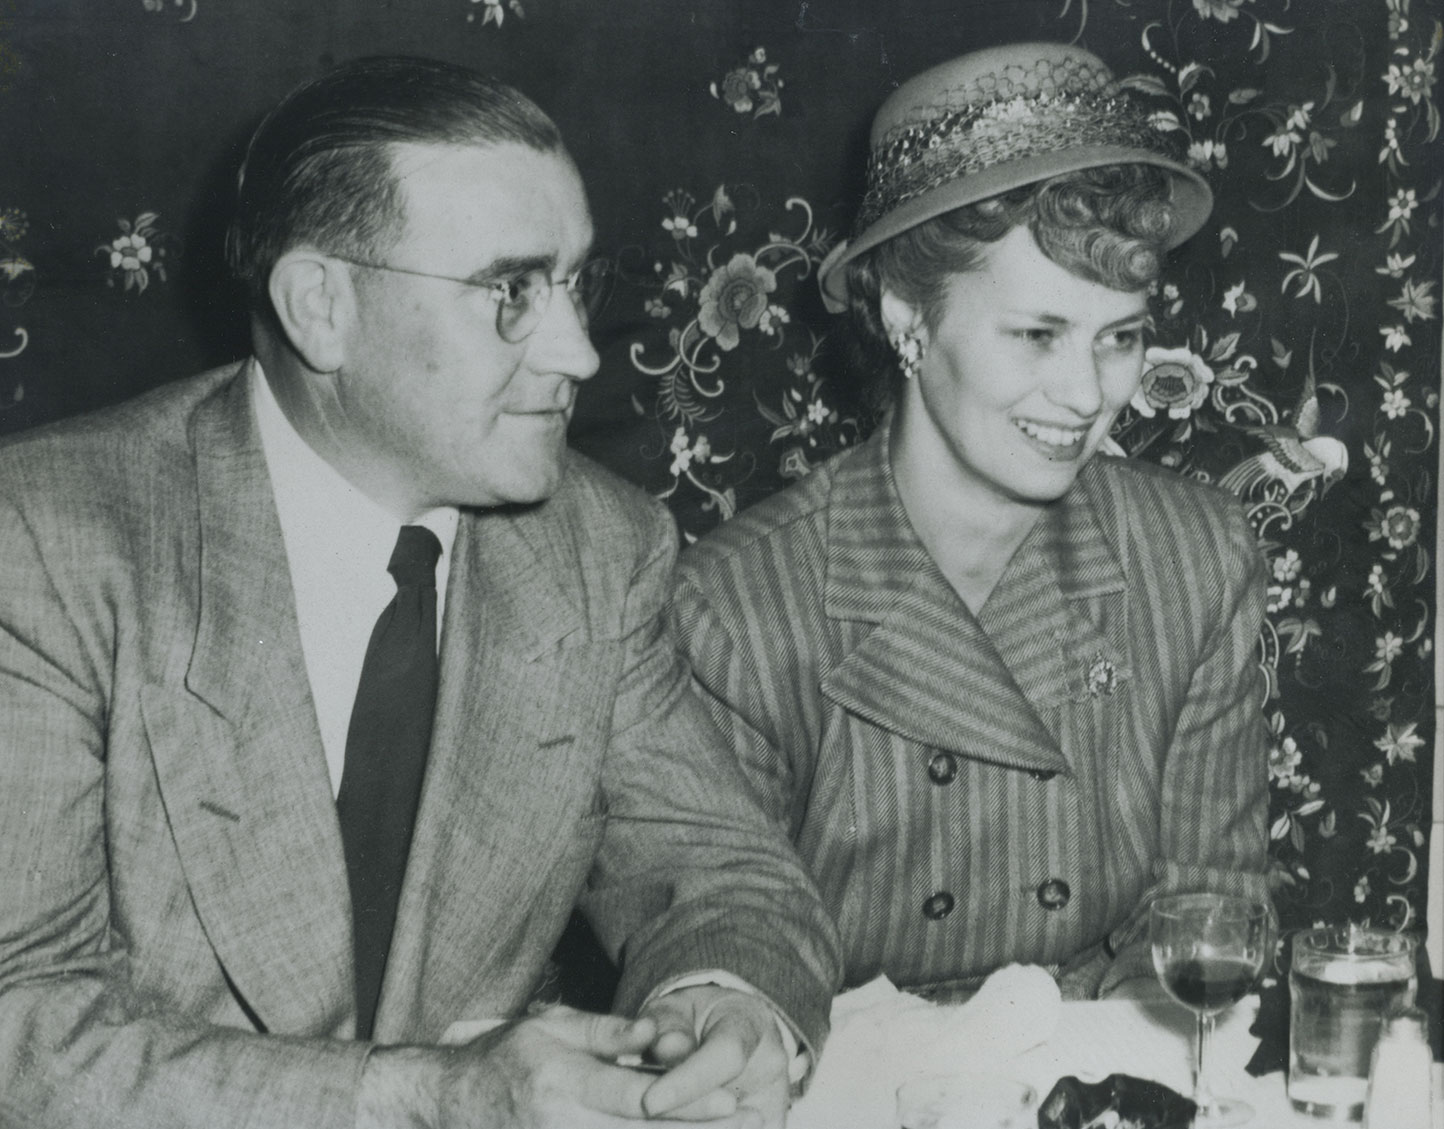 Black and white image of man in suit and woman in hat and jacket sitting at table